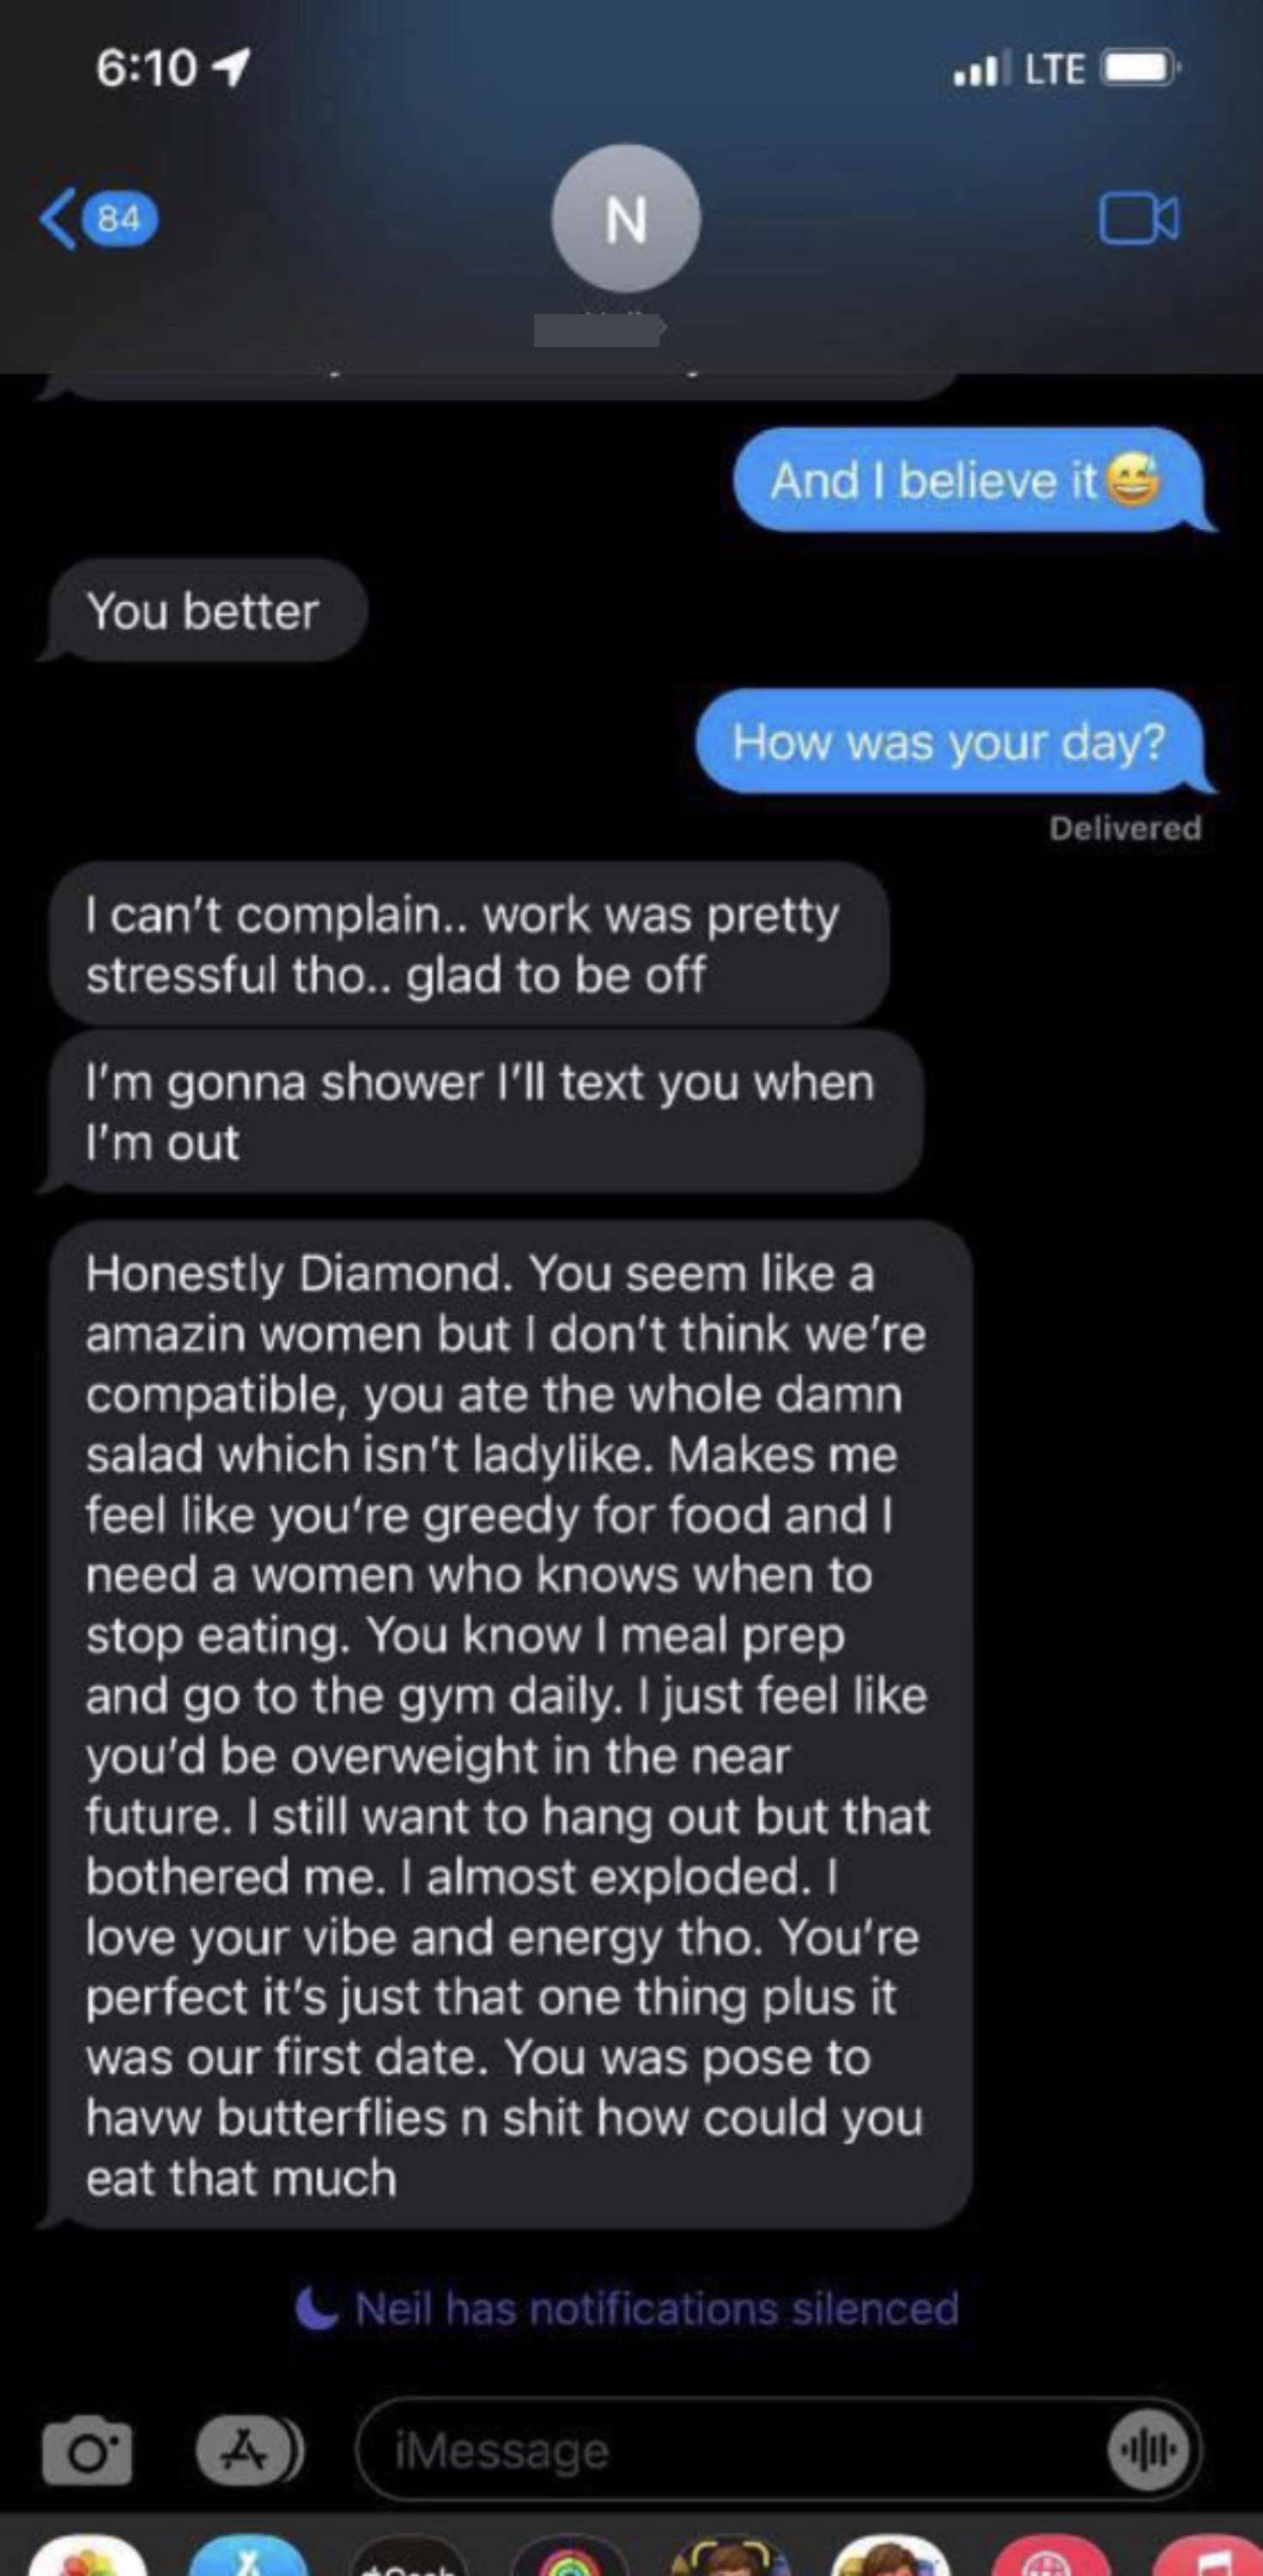 Person tells someone after one date that they&#x27;re not compatible &#x27;cause she ate &quot;the whole damn salad which isn&#x27;t ladylike,&quot; and they&#x27;re worried she&#x27;s greedy and will be overweight in the near future, and they need a woman who knows when to stop eating